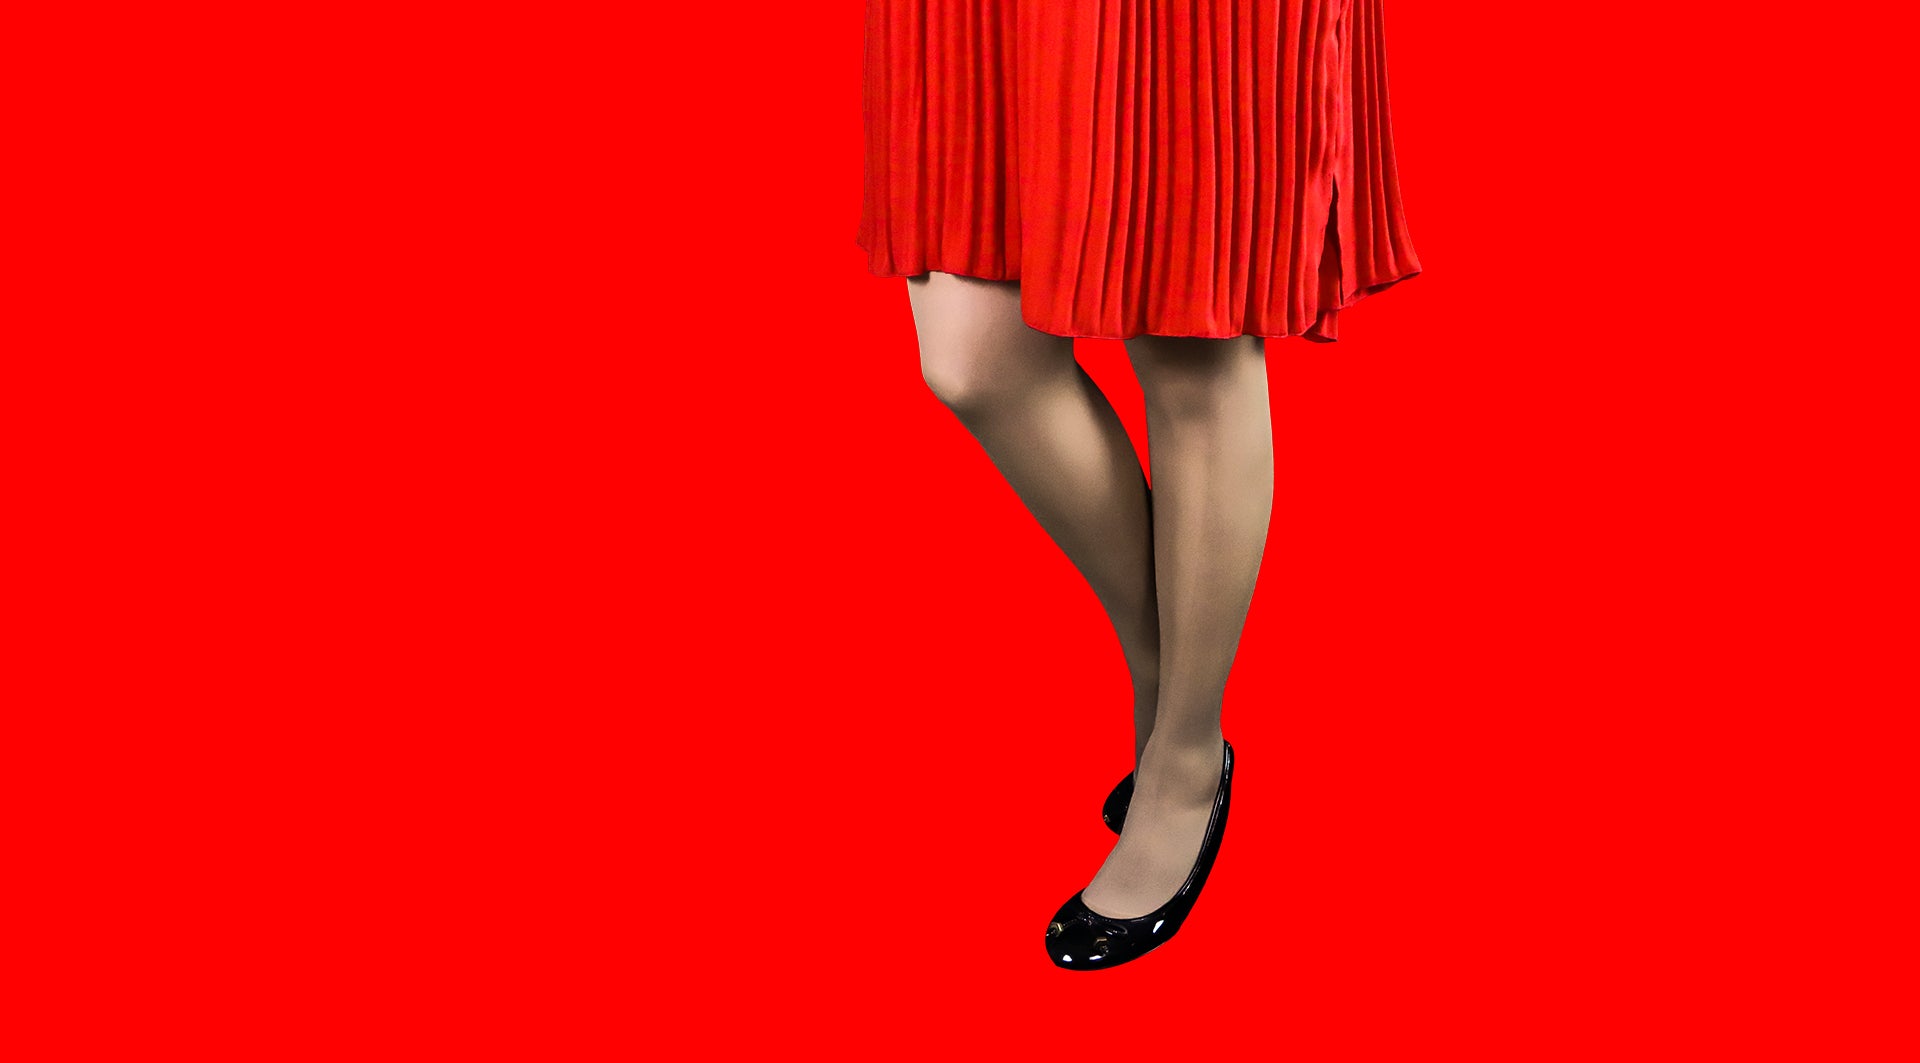 Woman Wearing Compression Stocking With Red Skirt - Slideshow Presents 10% Promotion On Purchase Of 4 Pairs